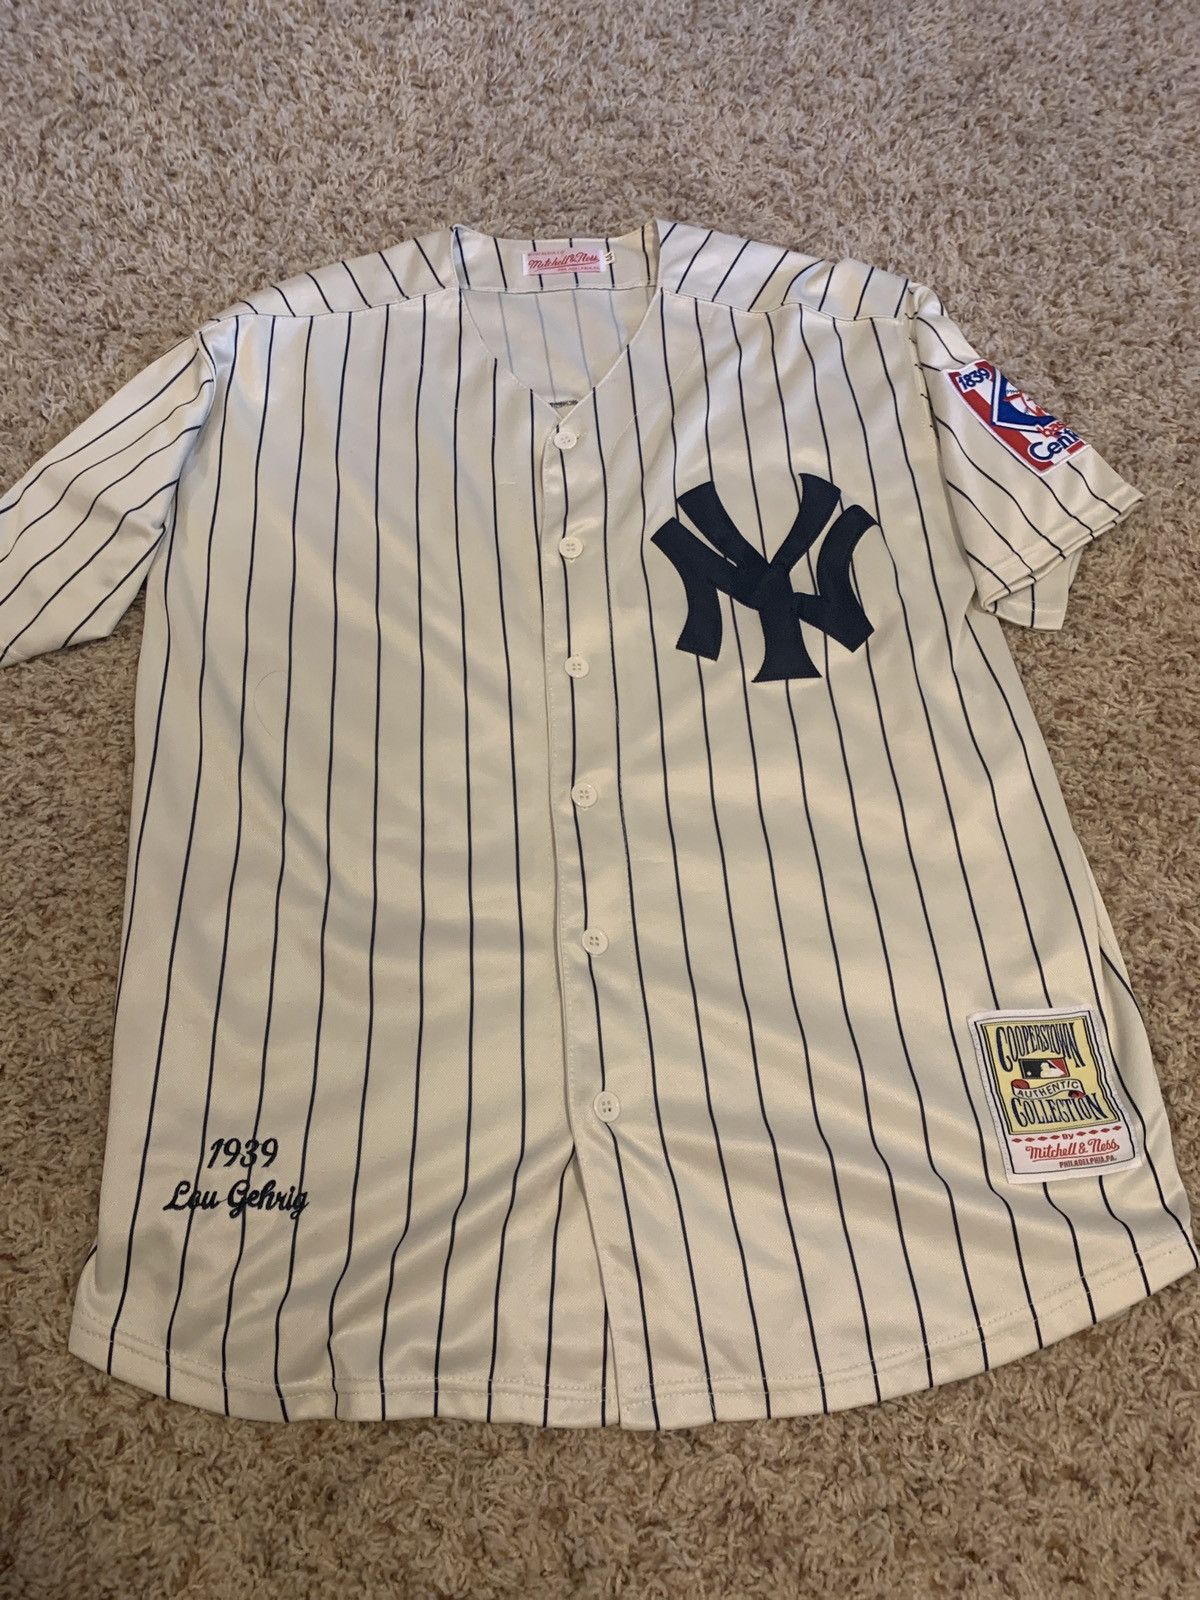 Mitchell & Ness Men's Lou Gehrig New York Yankees Authentic Jersey